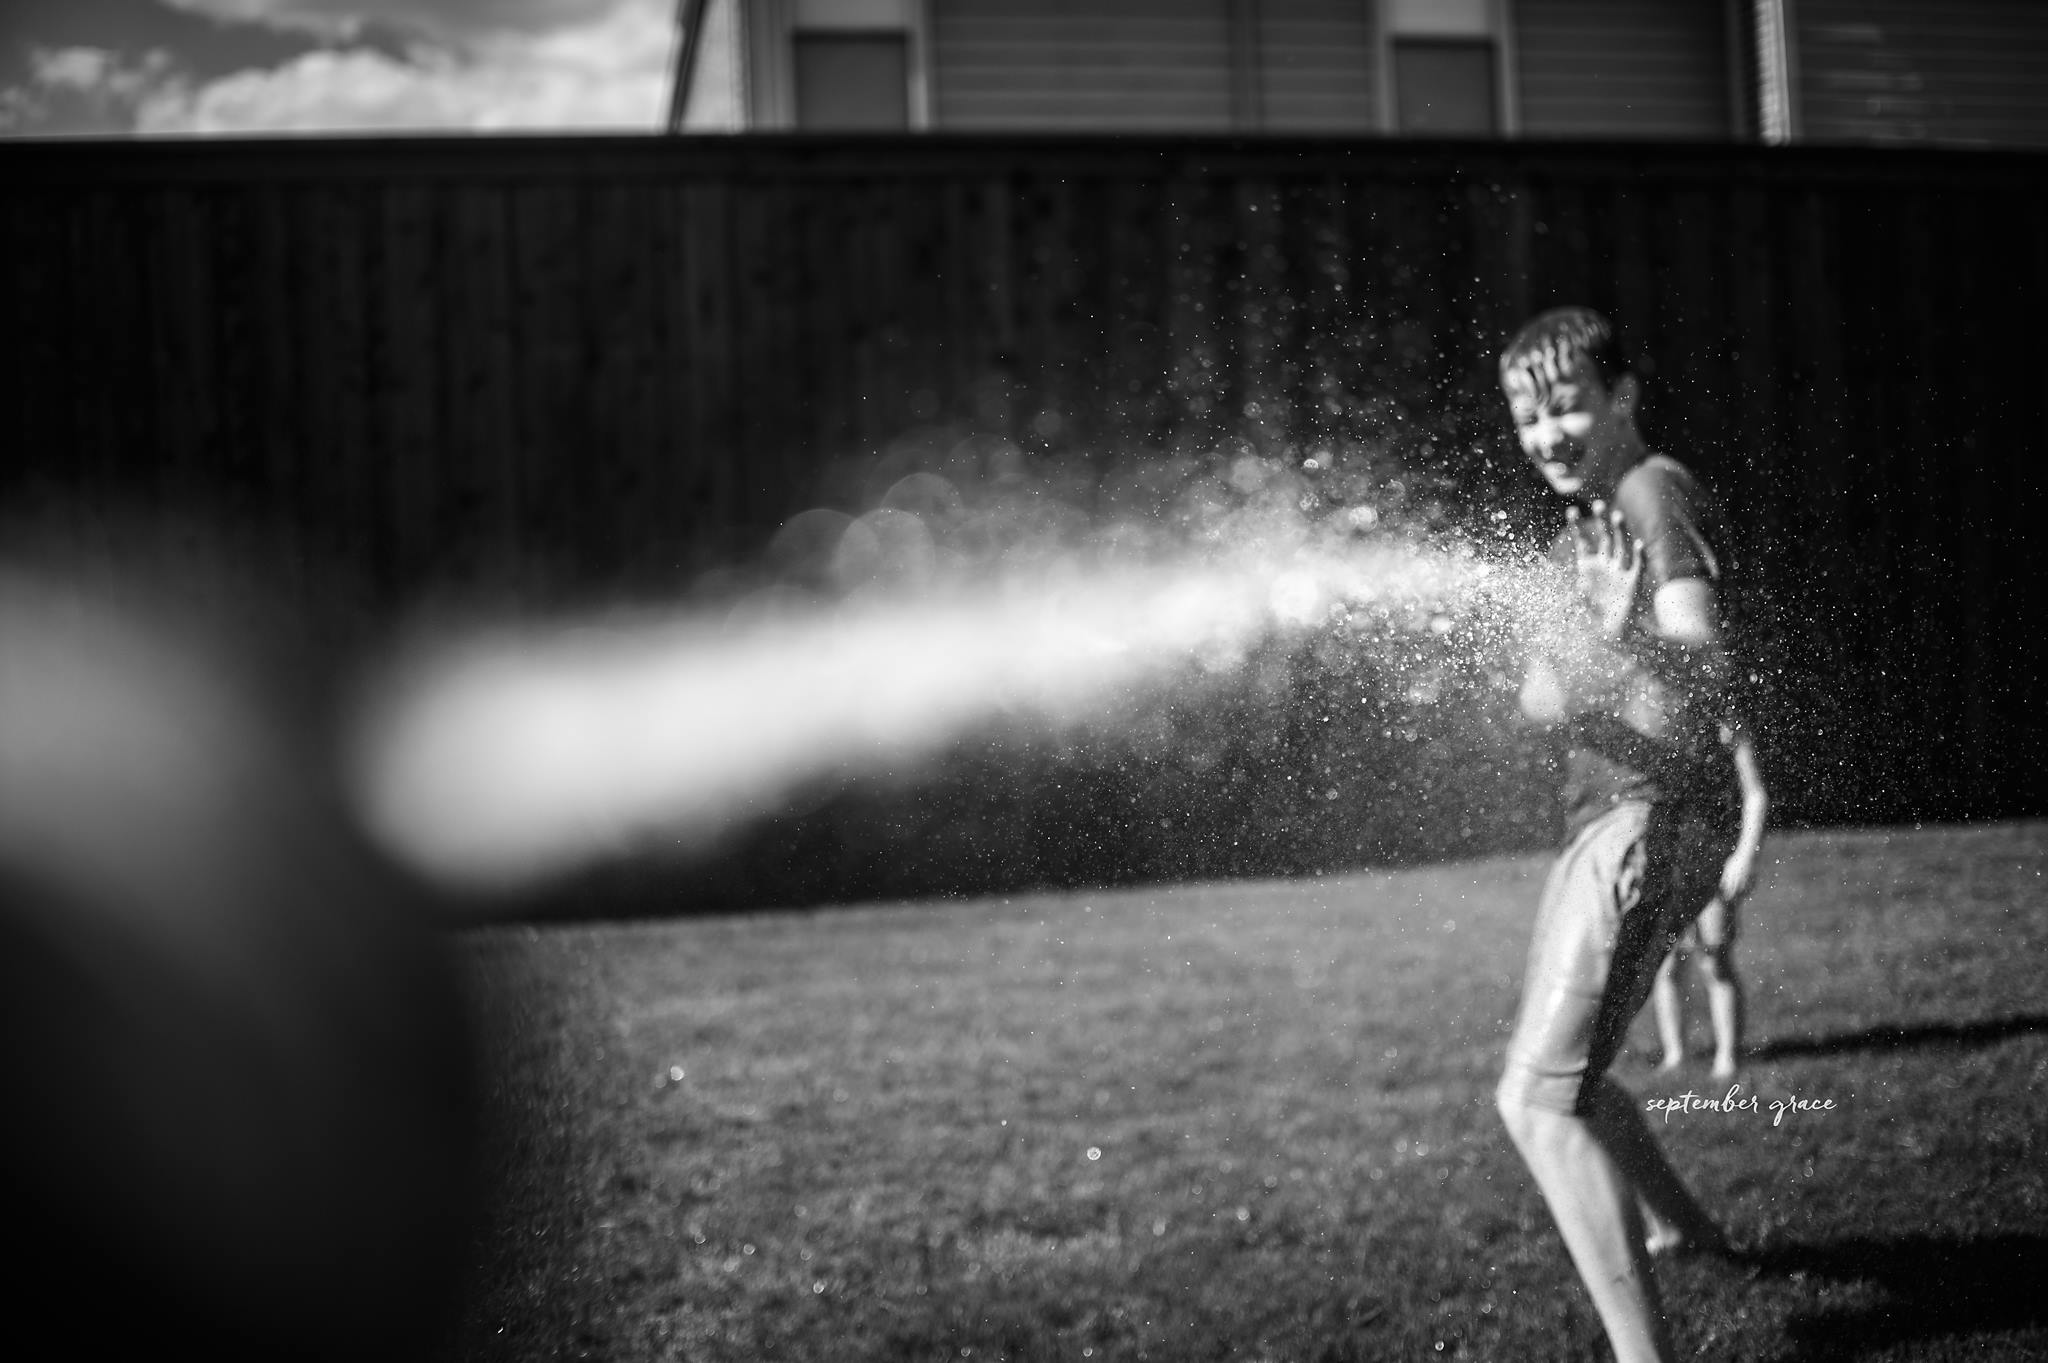 sprinkler pictures, the daily story